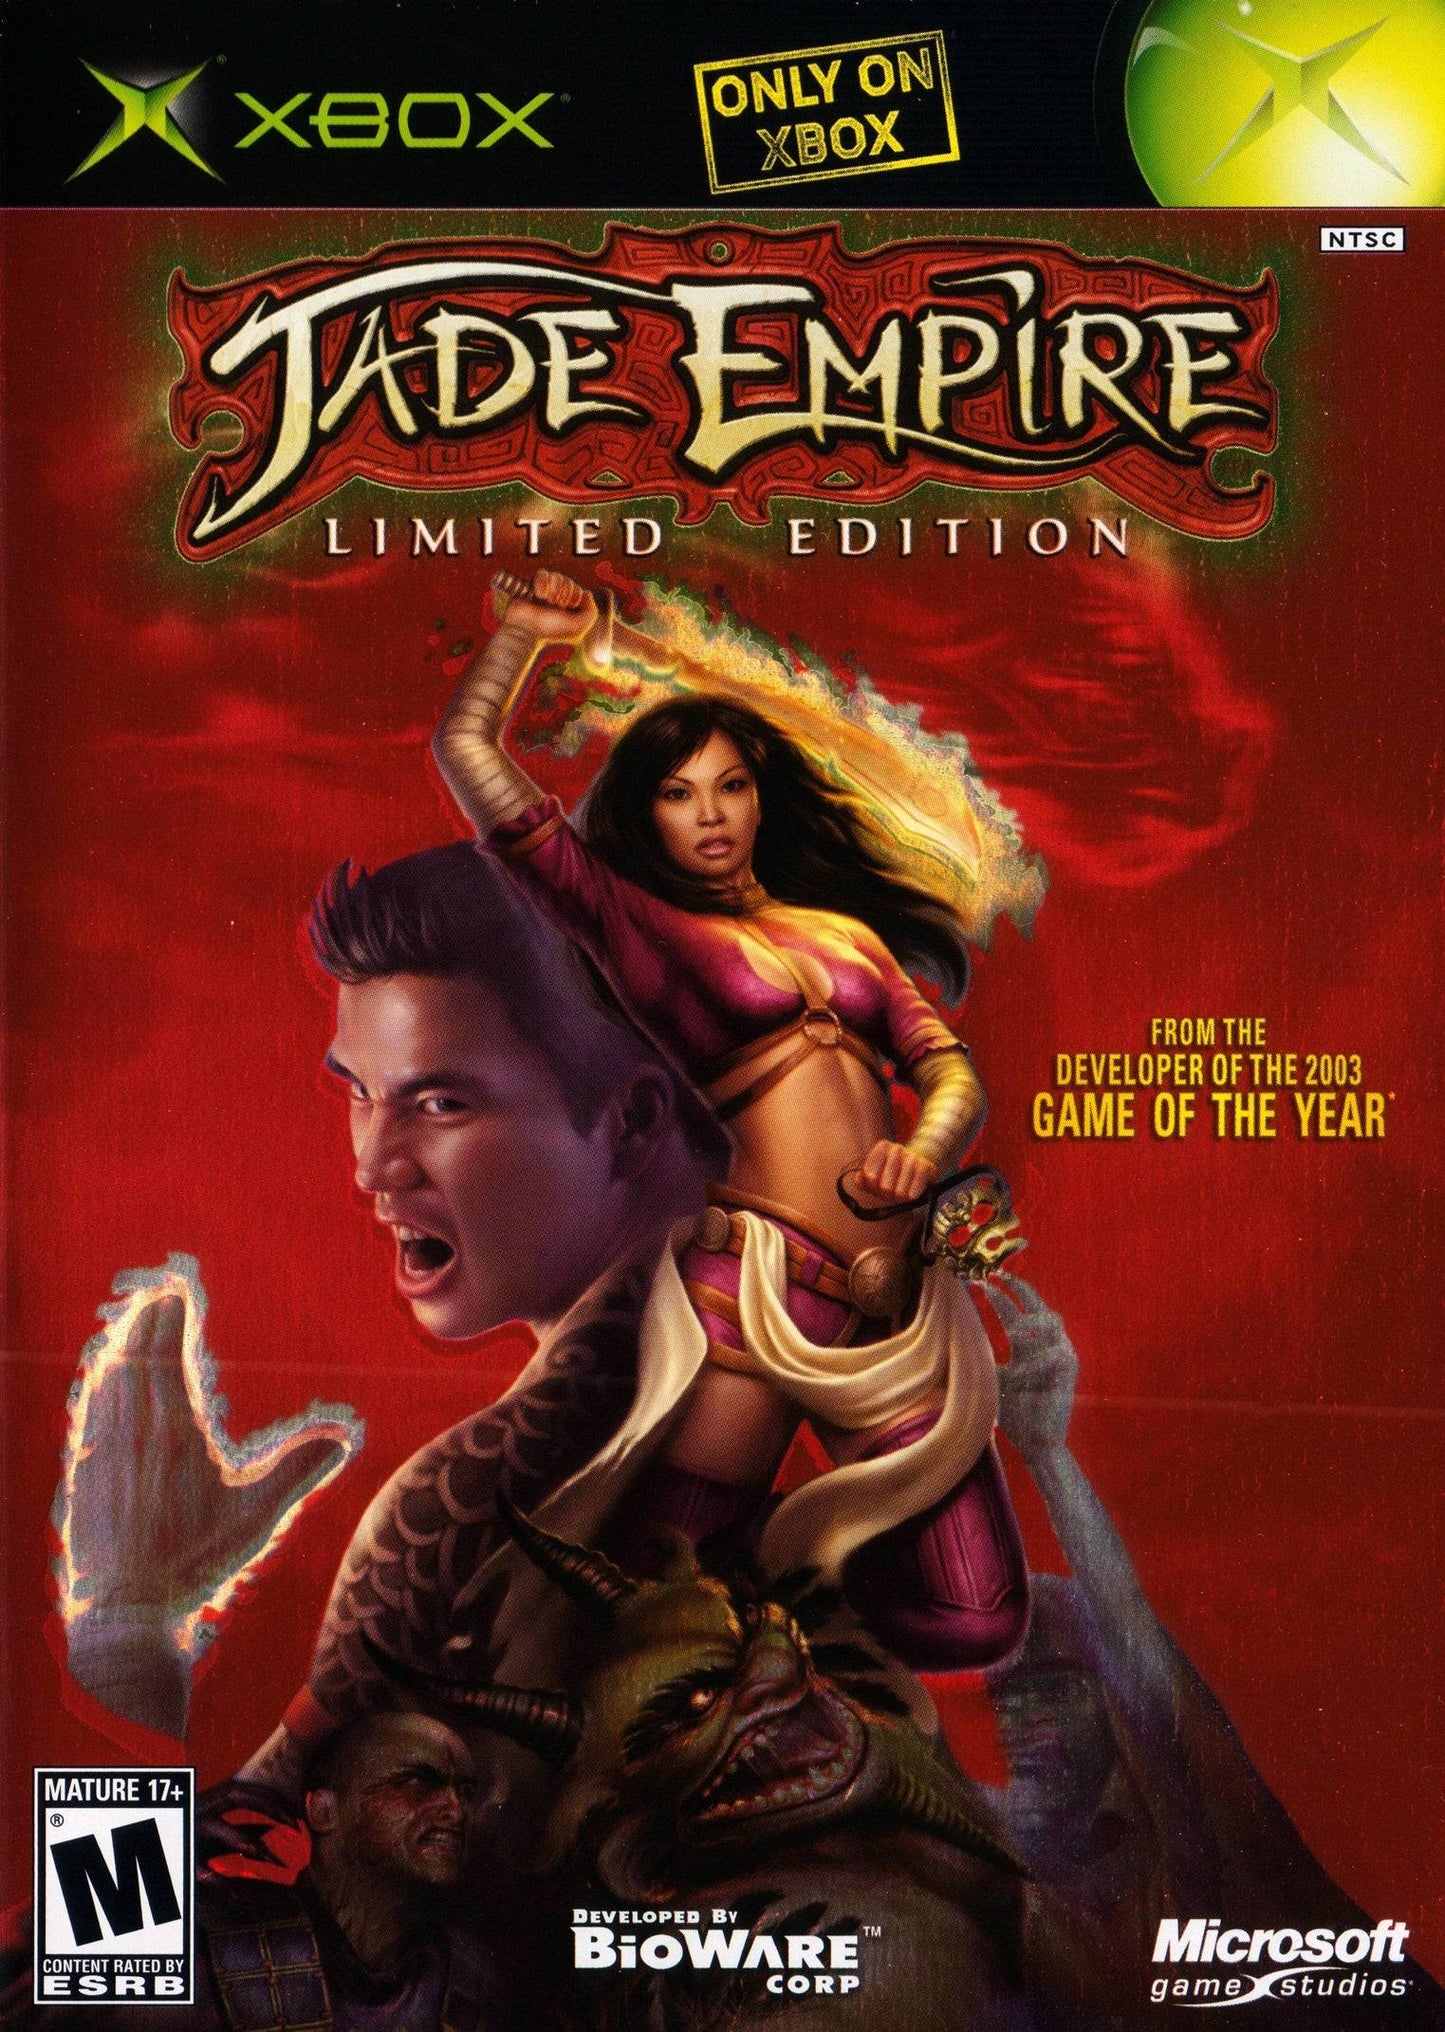 JADE EMPIRE LIMITED EDITION (XBOX) - jeux video game-x